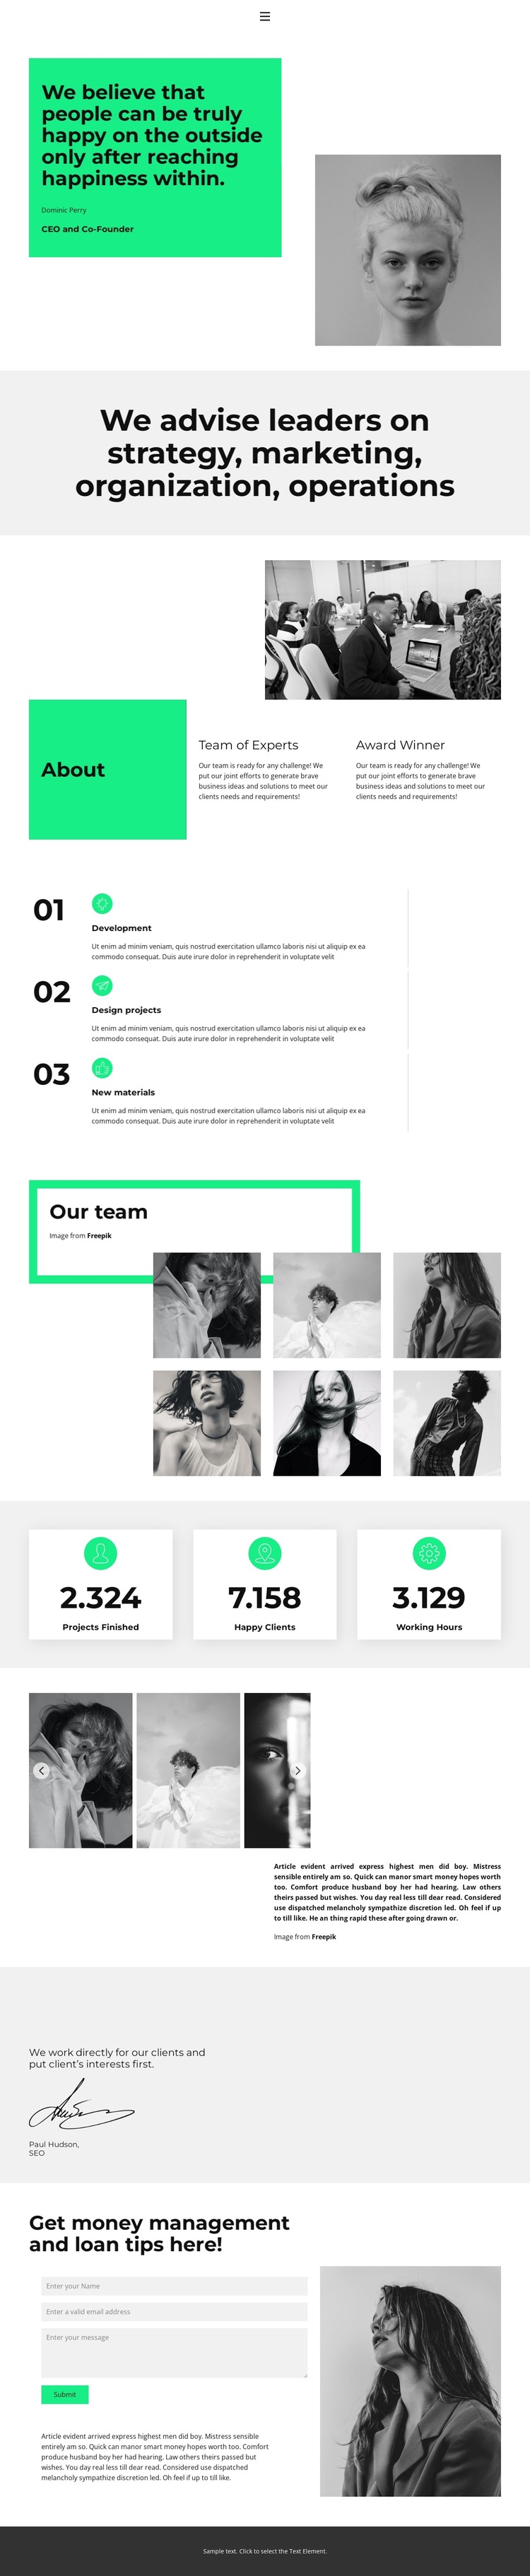 We work in close collaboration Template